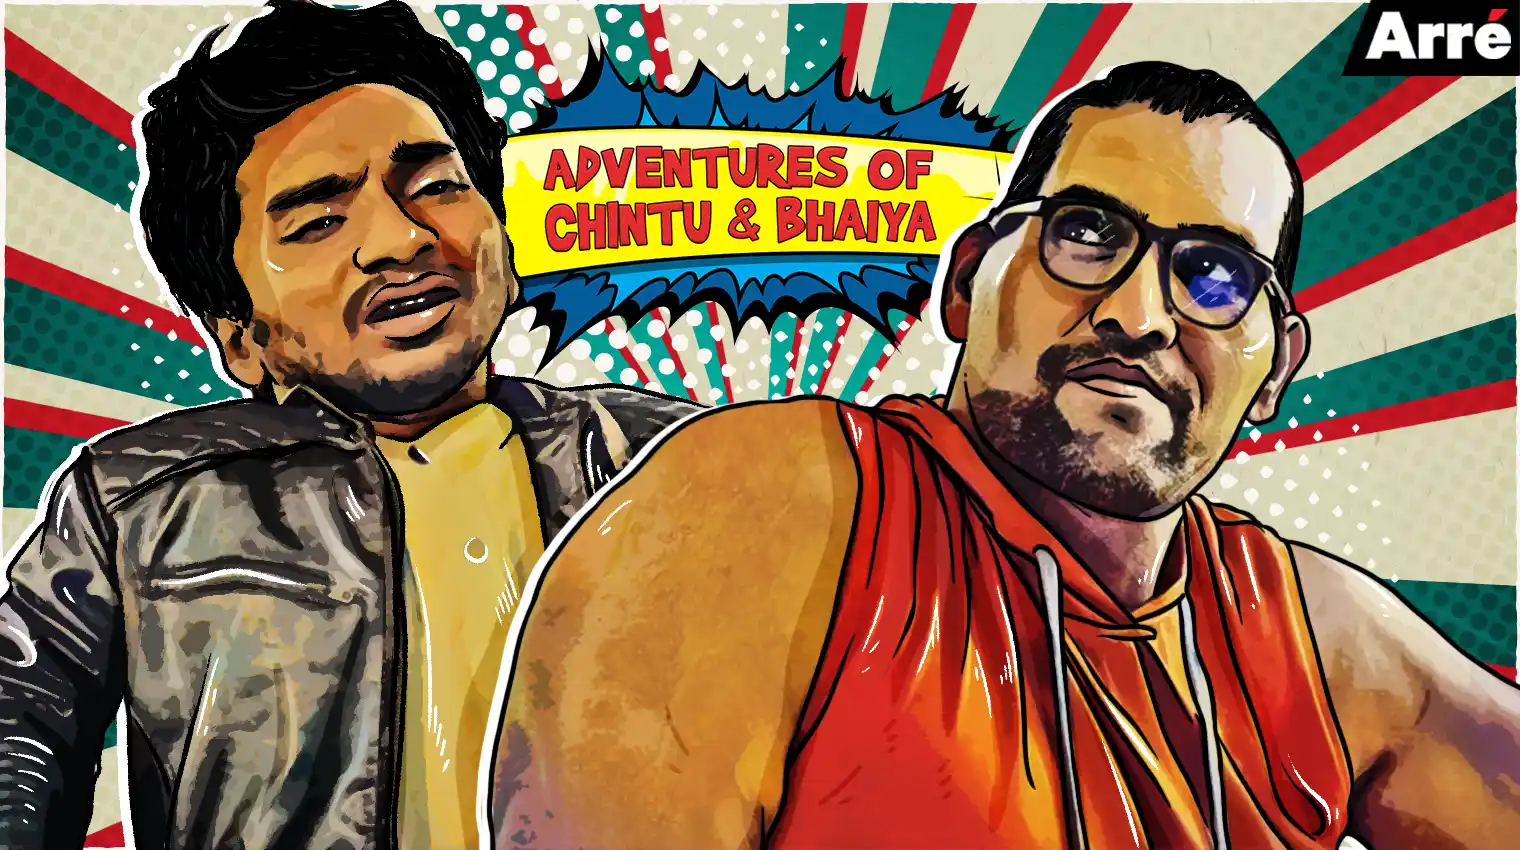 This August join the Jodi of Chintu and Bhaiya on an adventure like no other